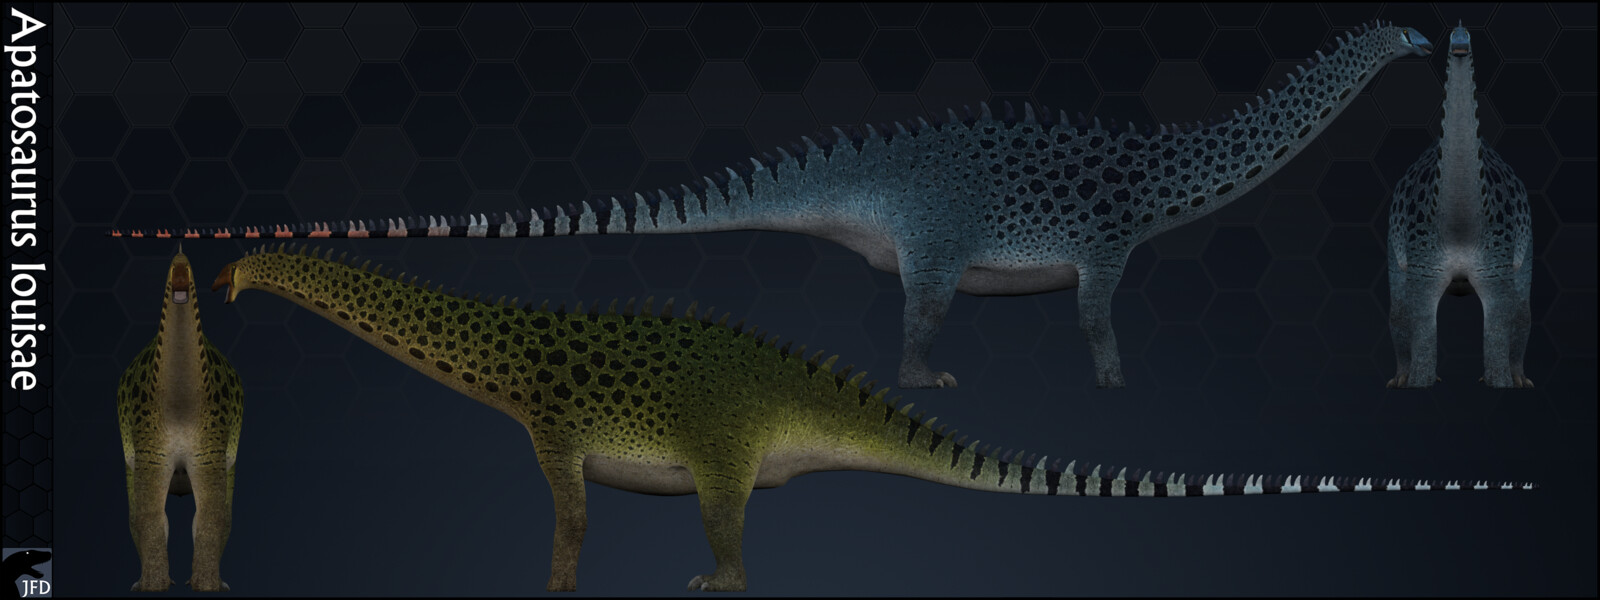 Comparison between altered Apatosaurus louisae to go into Jurassic World Evolution  (Top) and the unaltered version (Bottom).